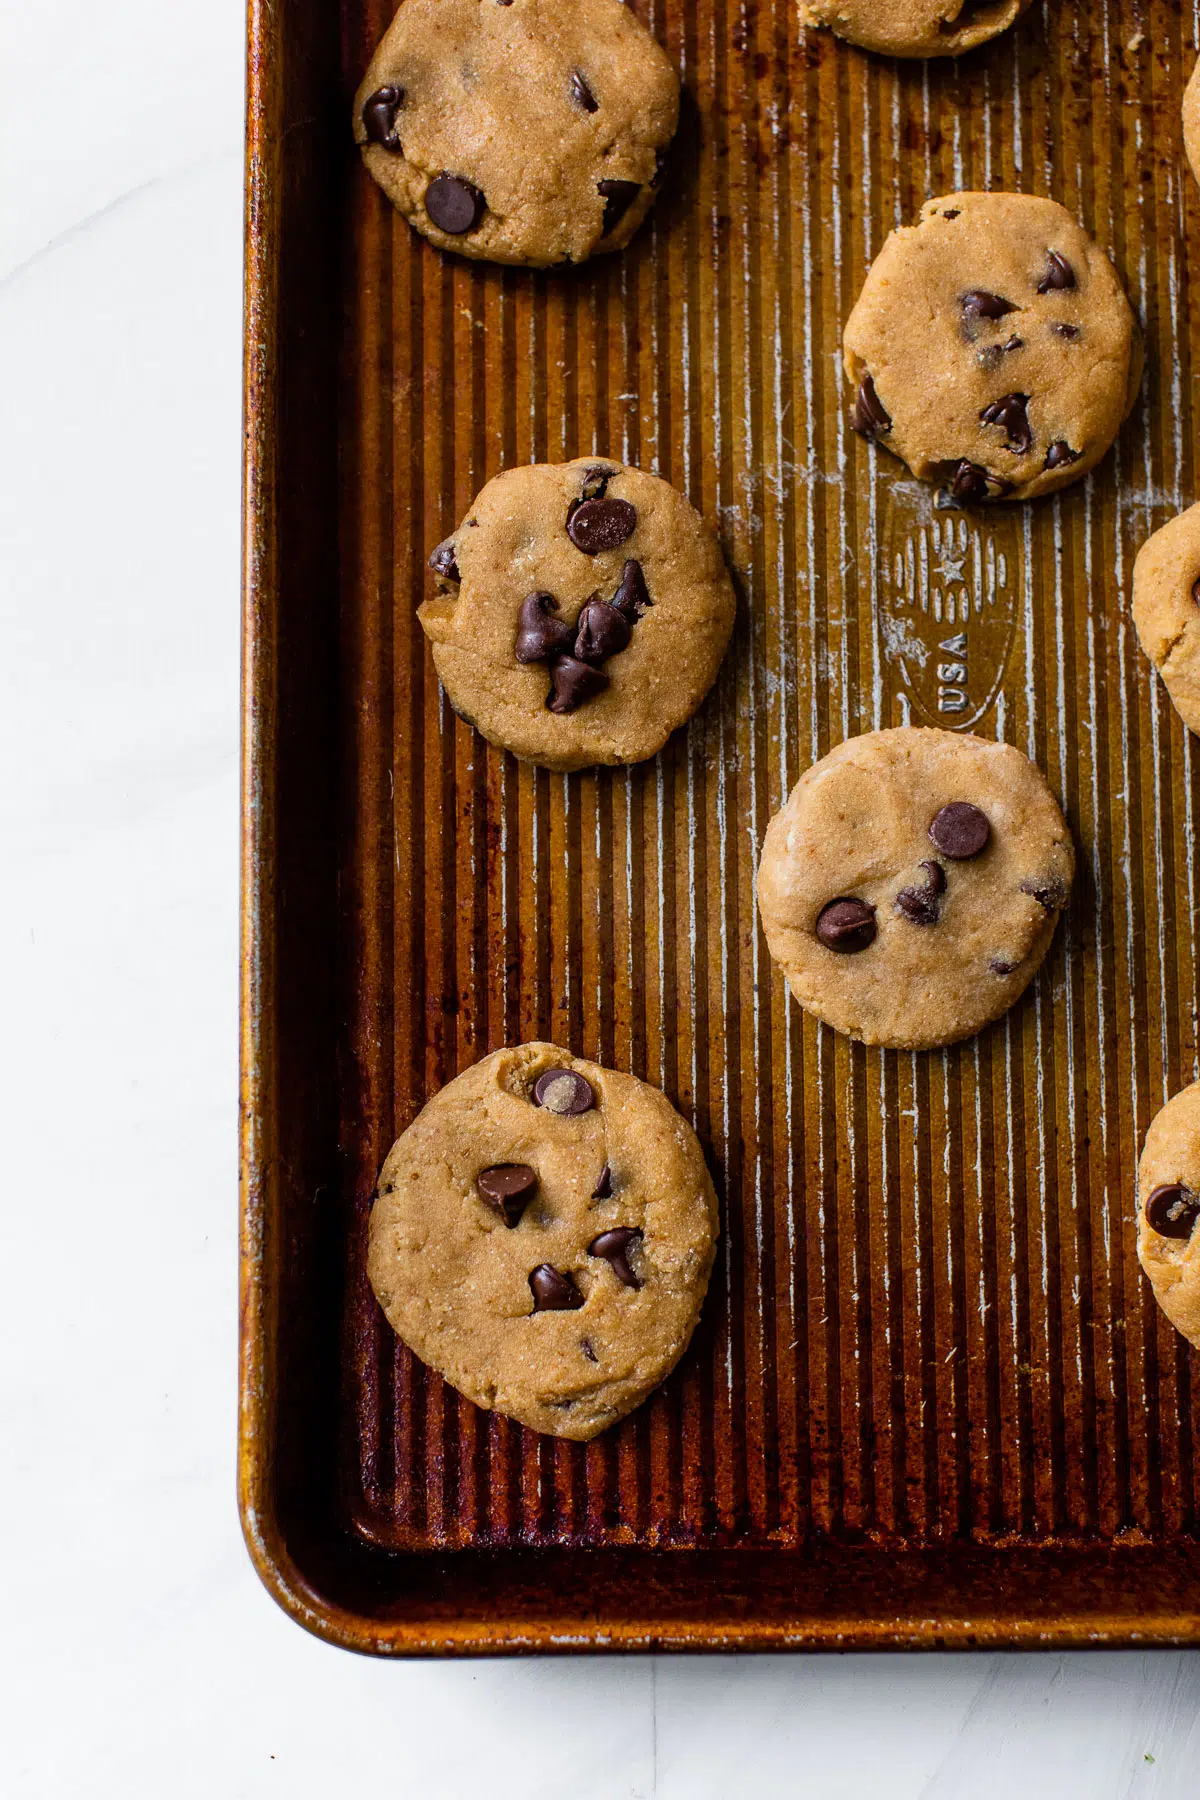 unbaked cookies with chocolate chips on a baking sheet